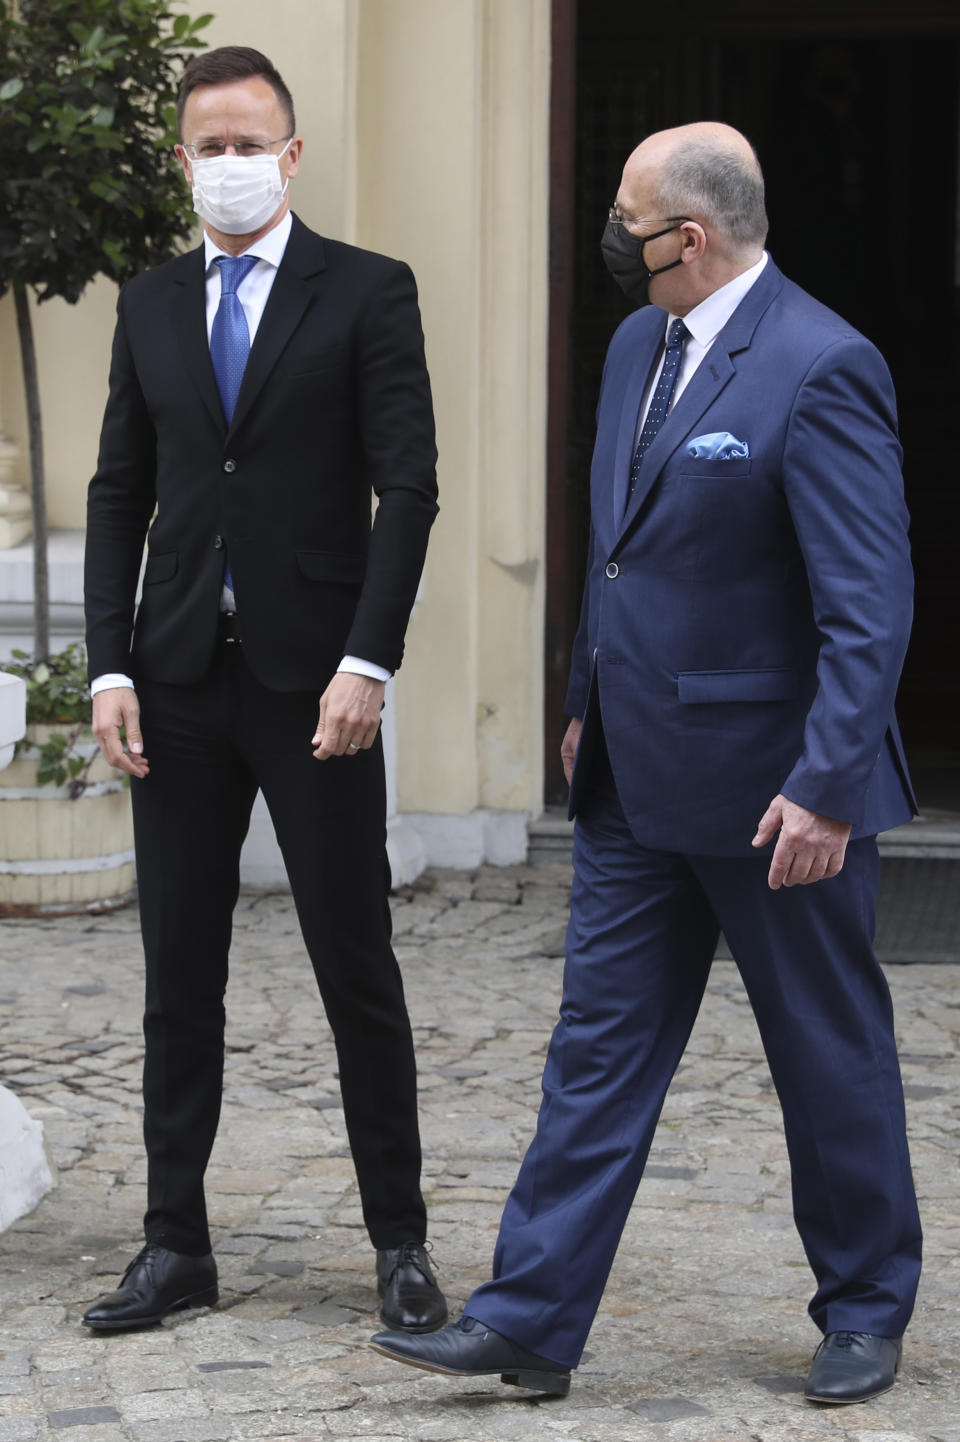 Poland's Foreign Minister Zbigniew Rau, right, walks with Hungarian Foreign Minister Peter Szijjarto during a meeting of foreign ministers from four central European countries known as the Visegrad Four in Lodz, Poland, Friday, May 14, 2021.(AP Photo/Czarek Sokolowski)